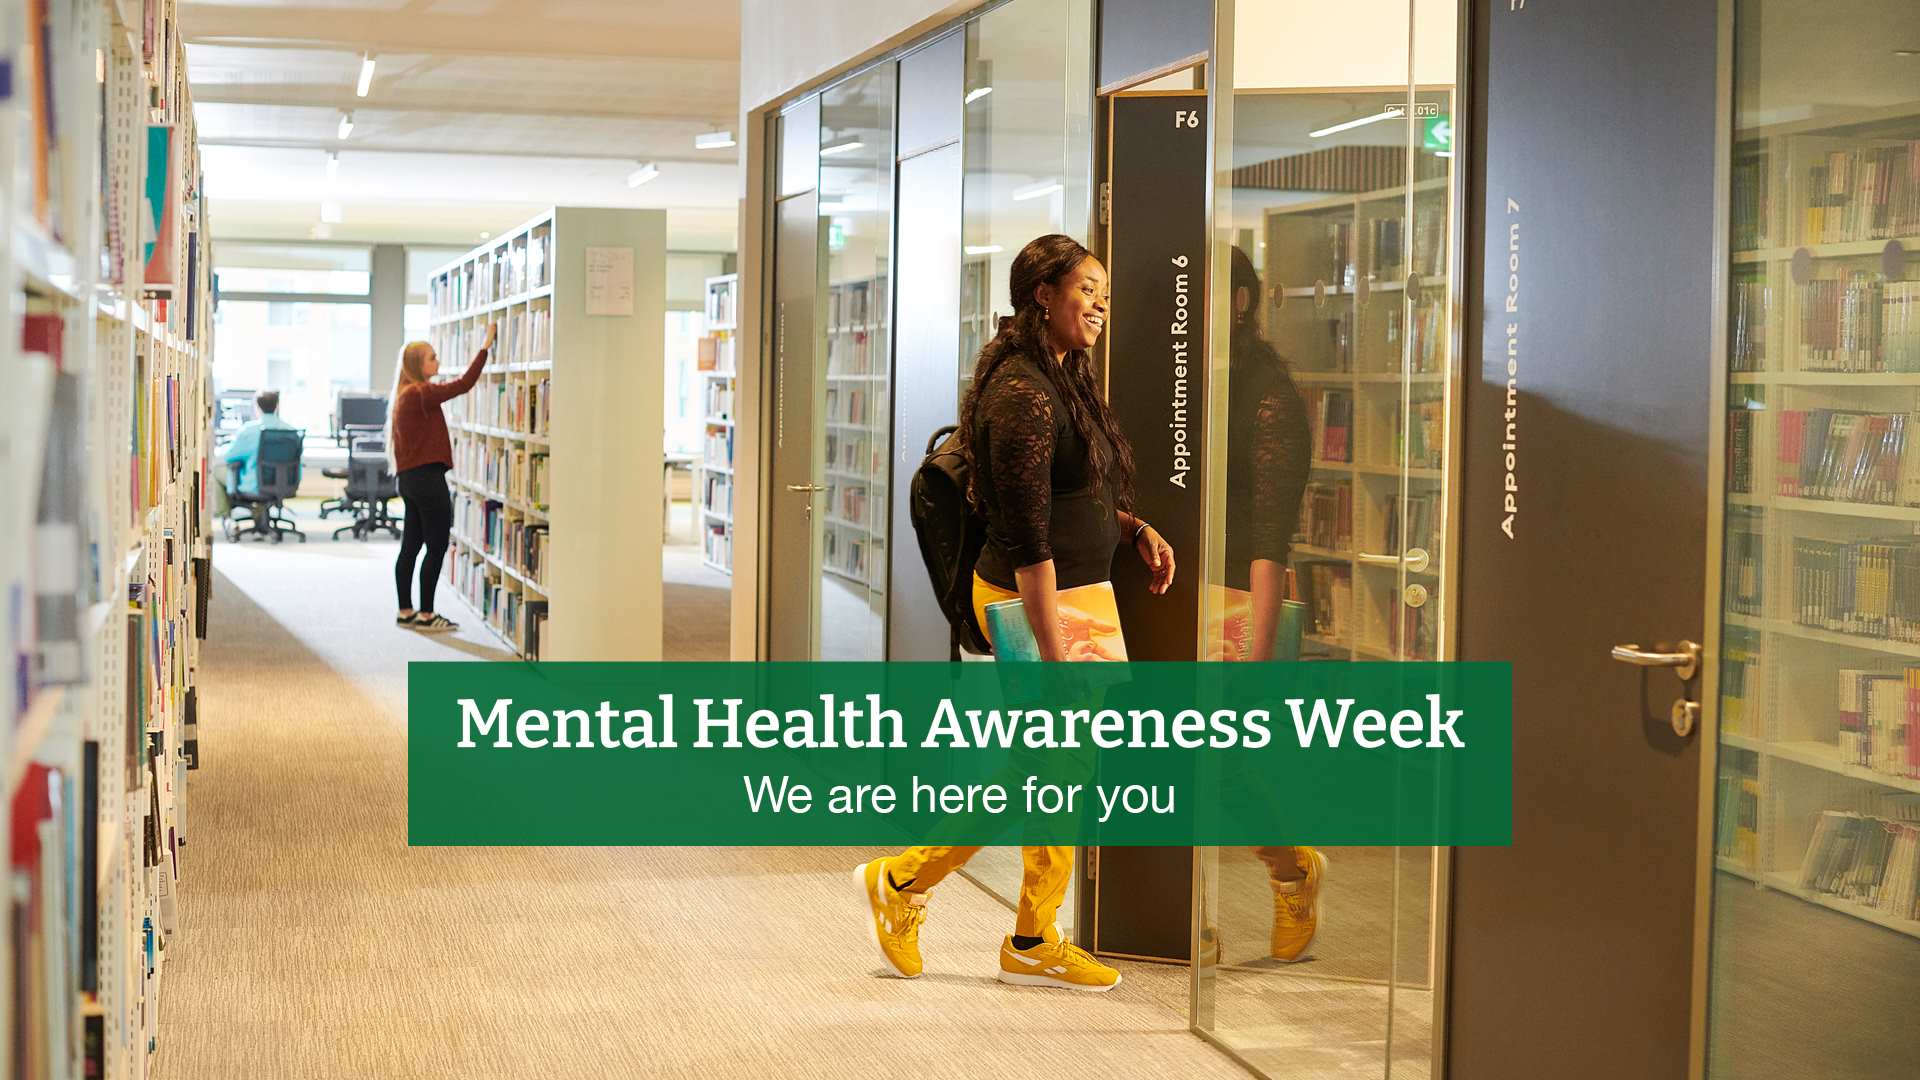 Mental health awareness week woman entering a wellbeing appointment at catalyst. text reading mental health awareness week, we are here for you